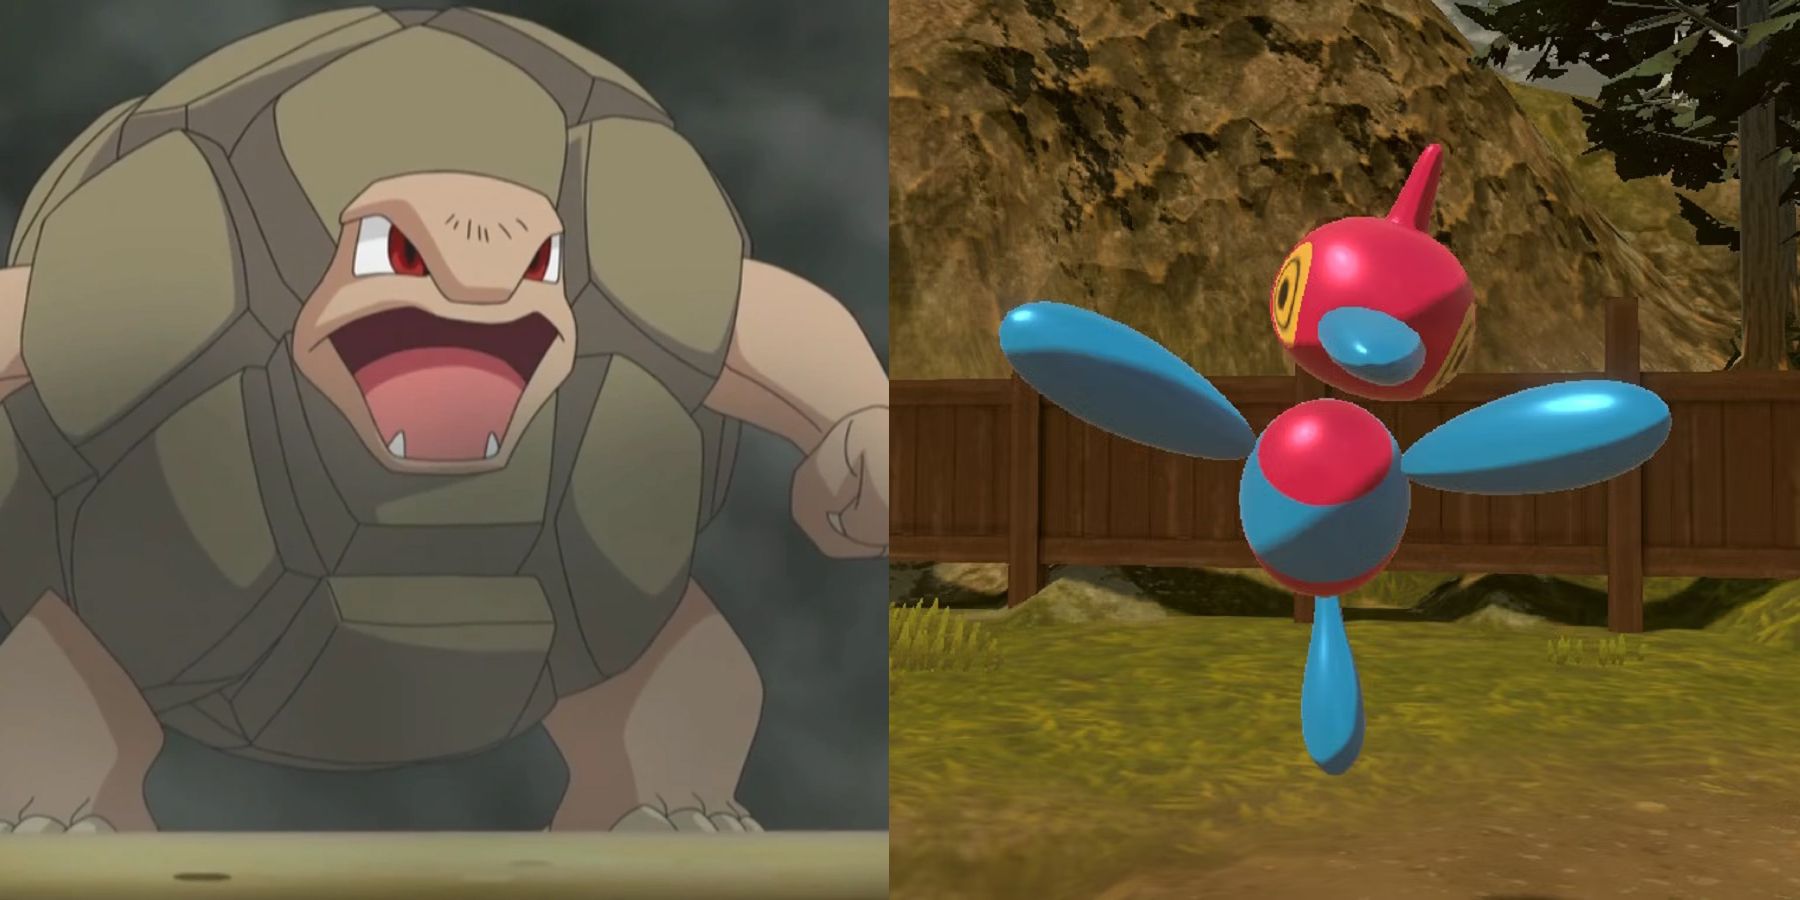 A spitscreen view of Golem and Porygon Z from Pokemon.